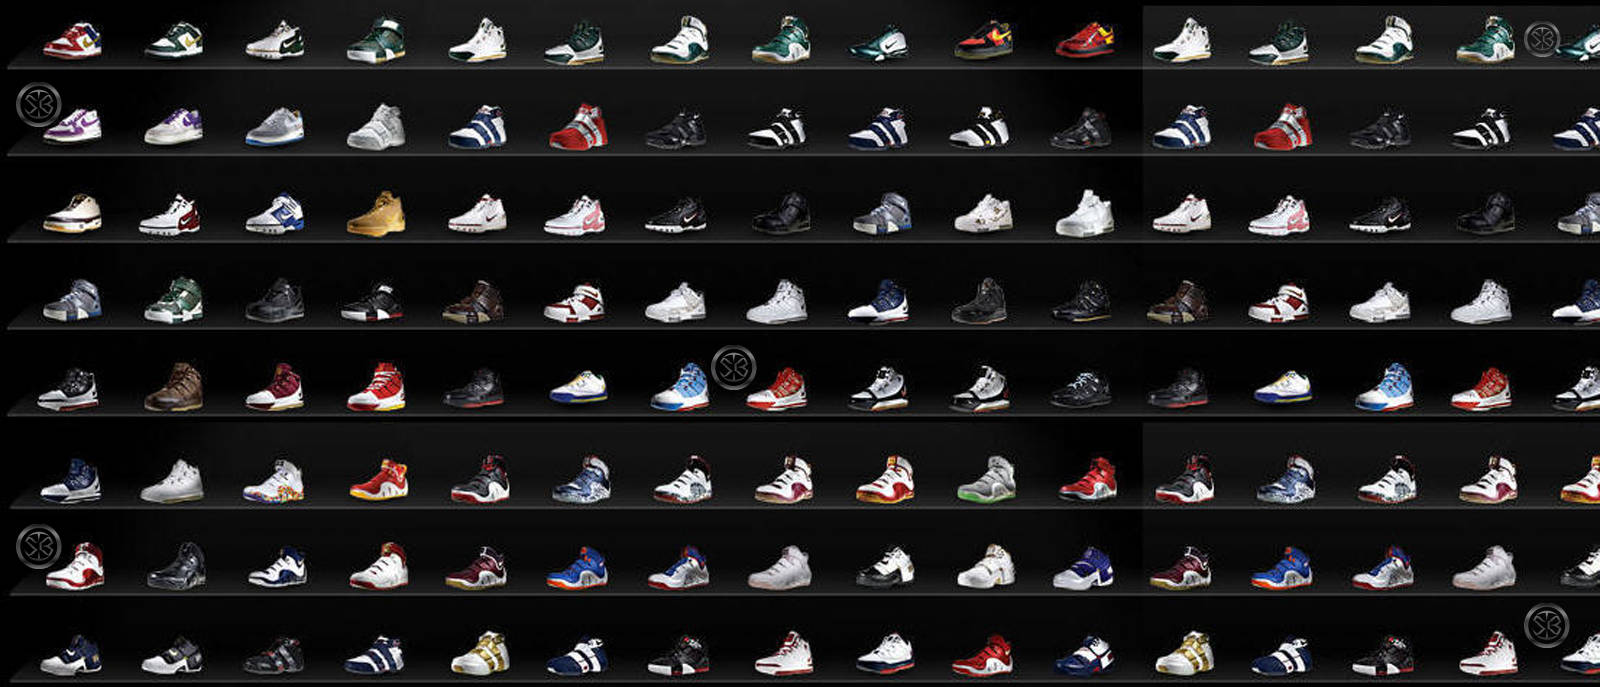 Impressive Sneaker Collection In Display Cabinet Background